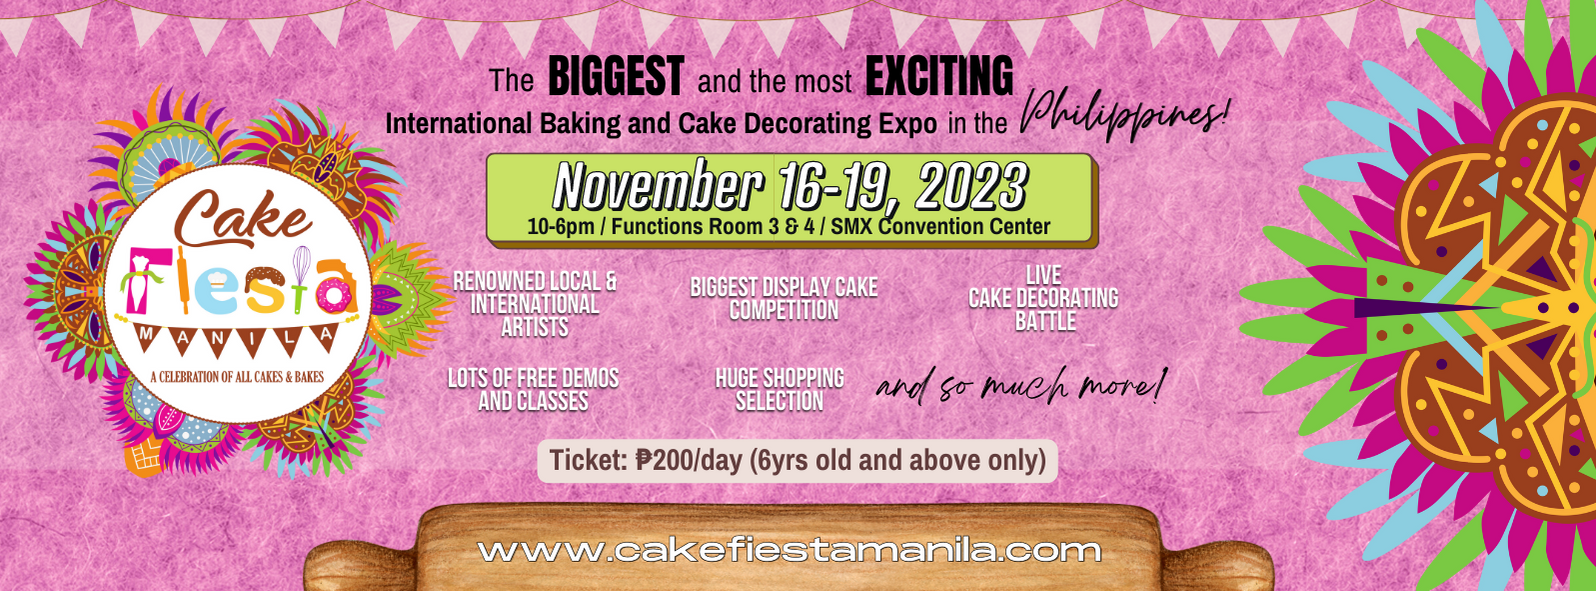 trade shows and franchise expos in the philippines 2023 - cake fiesta